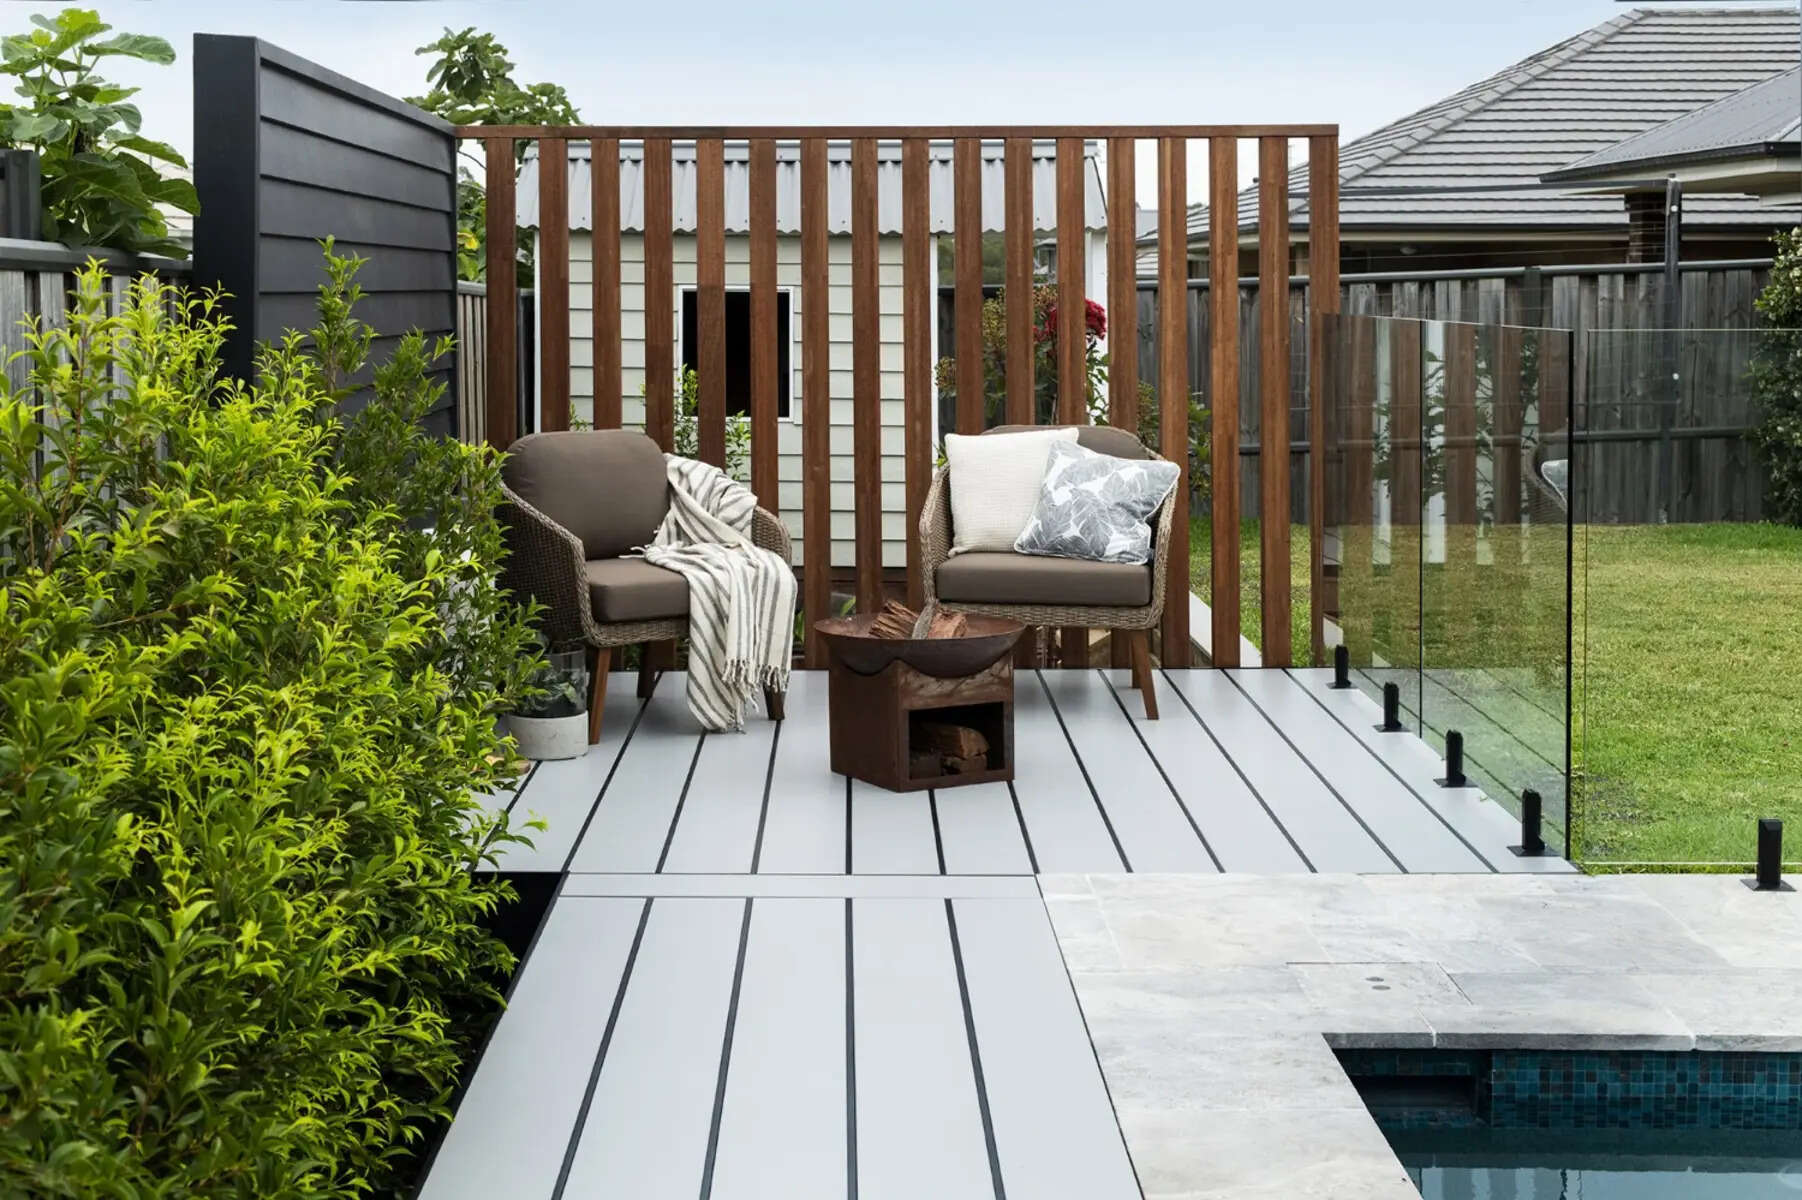 Revamping Spaces: Adding A Privacy Screen To Your Deck